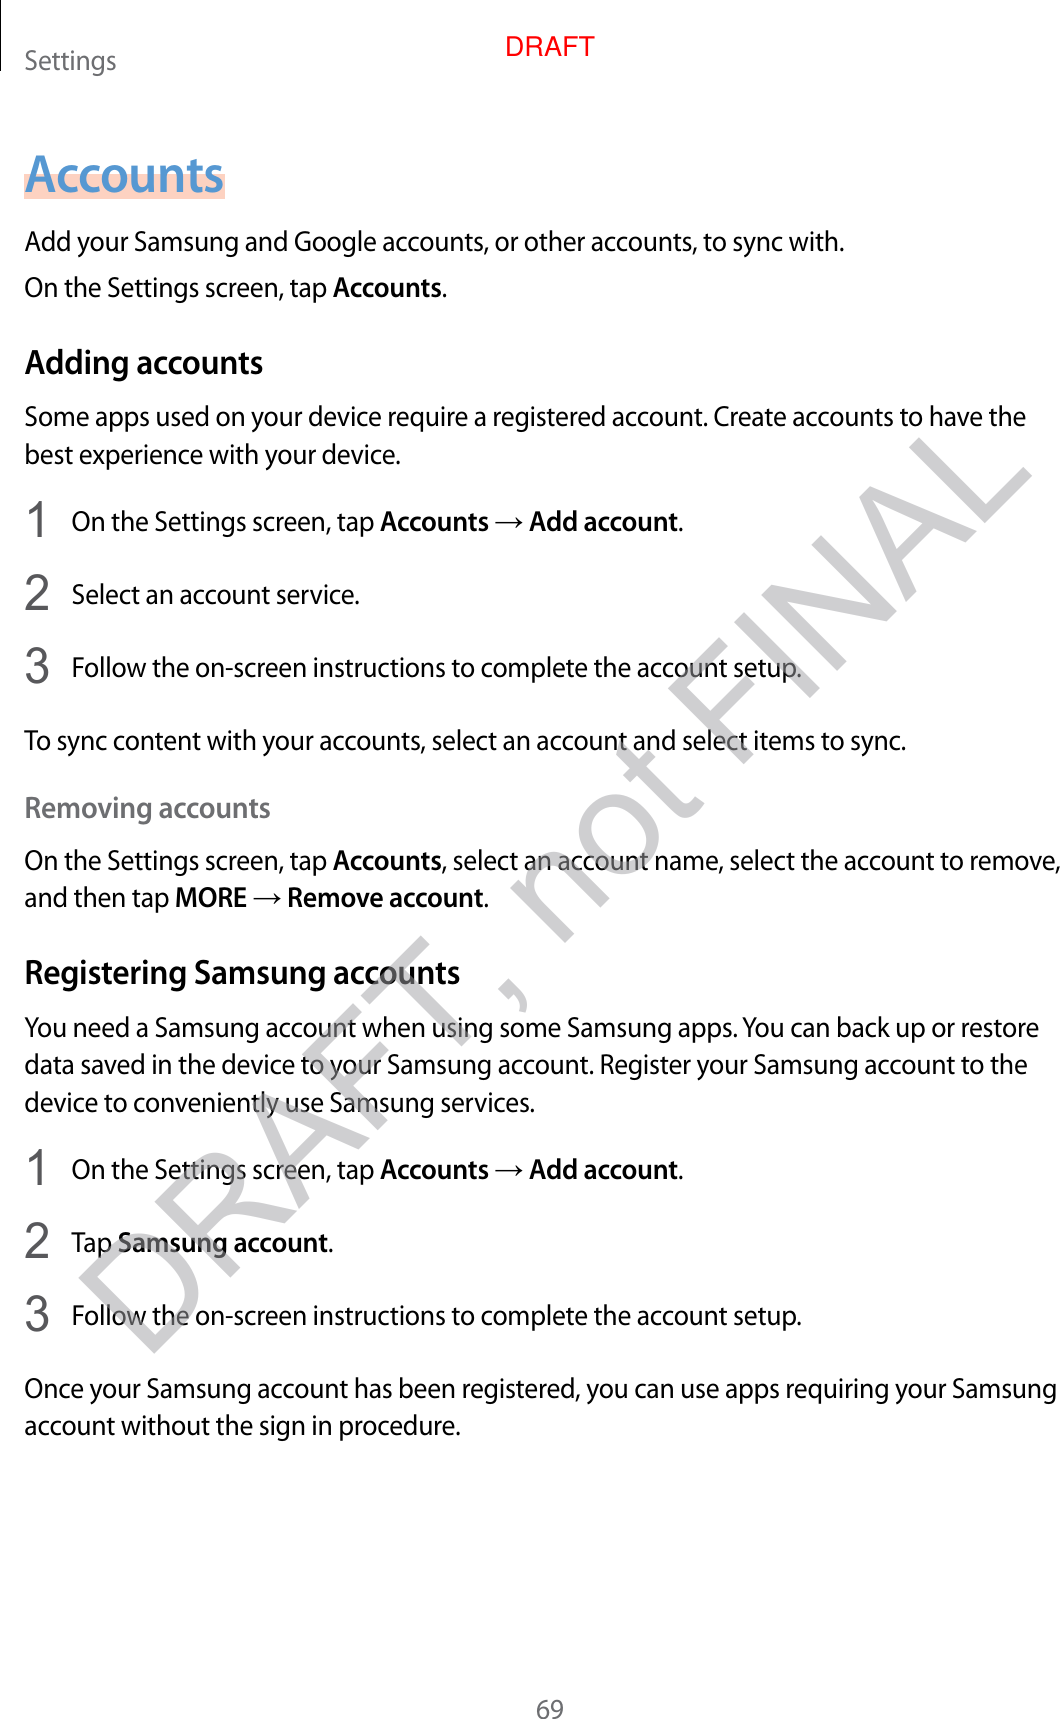 Settings69AccountsAdd your Samsung and Google accounts, or other accounts, to sync with.On the Settings screen, tap Accounts.Adding accountsSome apps used on your device require a registered account. Create accounts to have the best experience with your device.1  On the Settings screen, tap Accounts → Add account.2  Select an account service.3  Follow the on-screen instructions to complete the account setup.To sync content with your accounts, select an account and select items to sync.Removing accountsOn the Settings screen, tap Accounts, select an account name, select the account to remove, and then tap MORE → Remove account.Registering Samsung accountsYou need a Samsung account when using some Samsung apps. You can back up or restore data saved in the device to your Samsung account. Register your Samsung account to the device to conveniently use Samsung services.1  On the Settings screen, tap Accounts → Add account.2  Tap Samsung account.3  Follow the on-screen instructions to complete the account setup.Once your Samsung account has been registered, you can use apps requiring your Samsung account without the sign in procedure.DRAFT, not FINALDRAFT